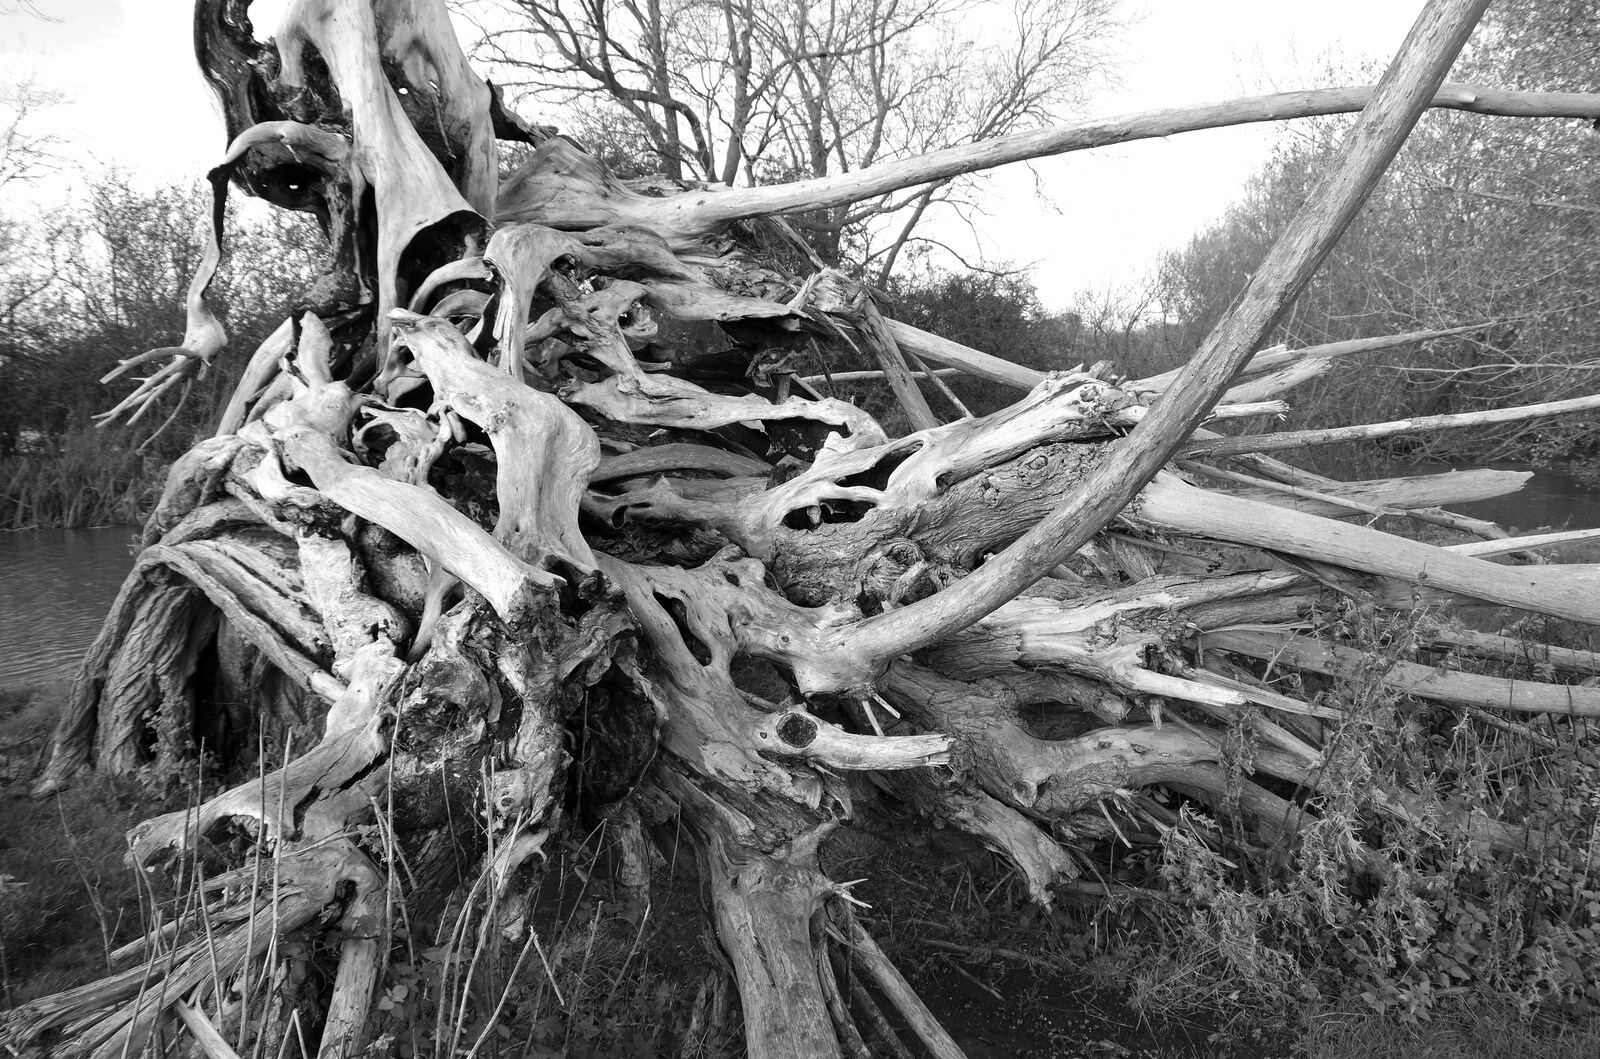 A Postcard from Flatford and Dedham, Suffolk and Essex, 9th November 2022: The amazing tree stump by the River Stour